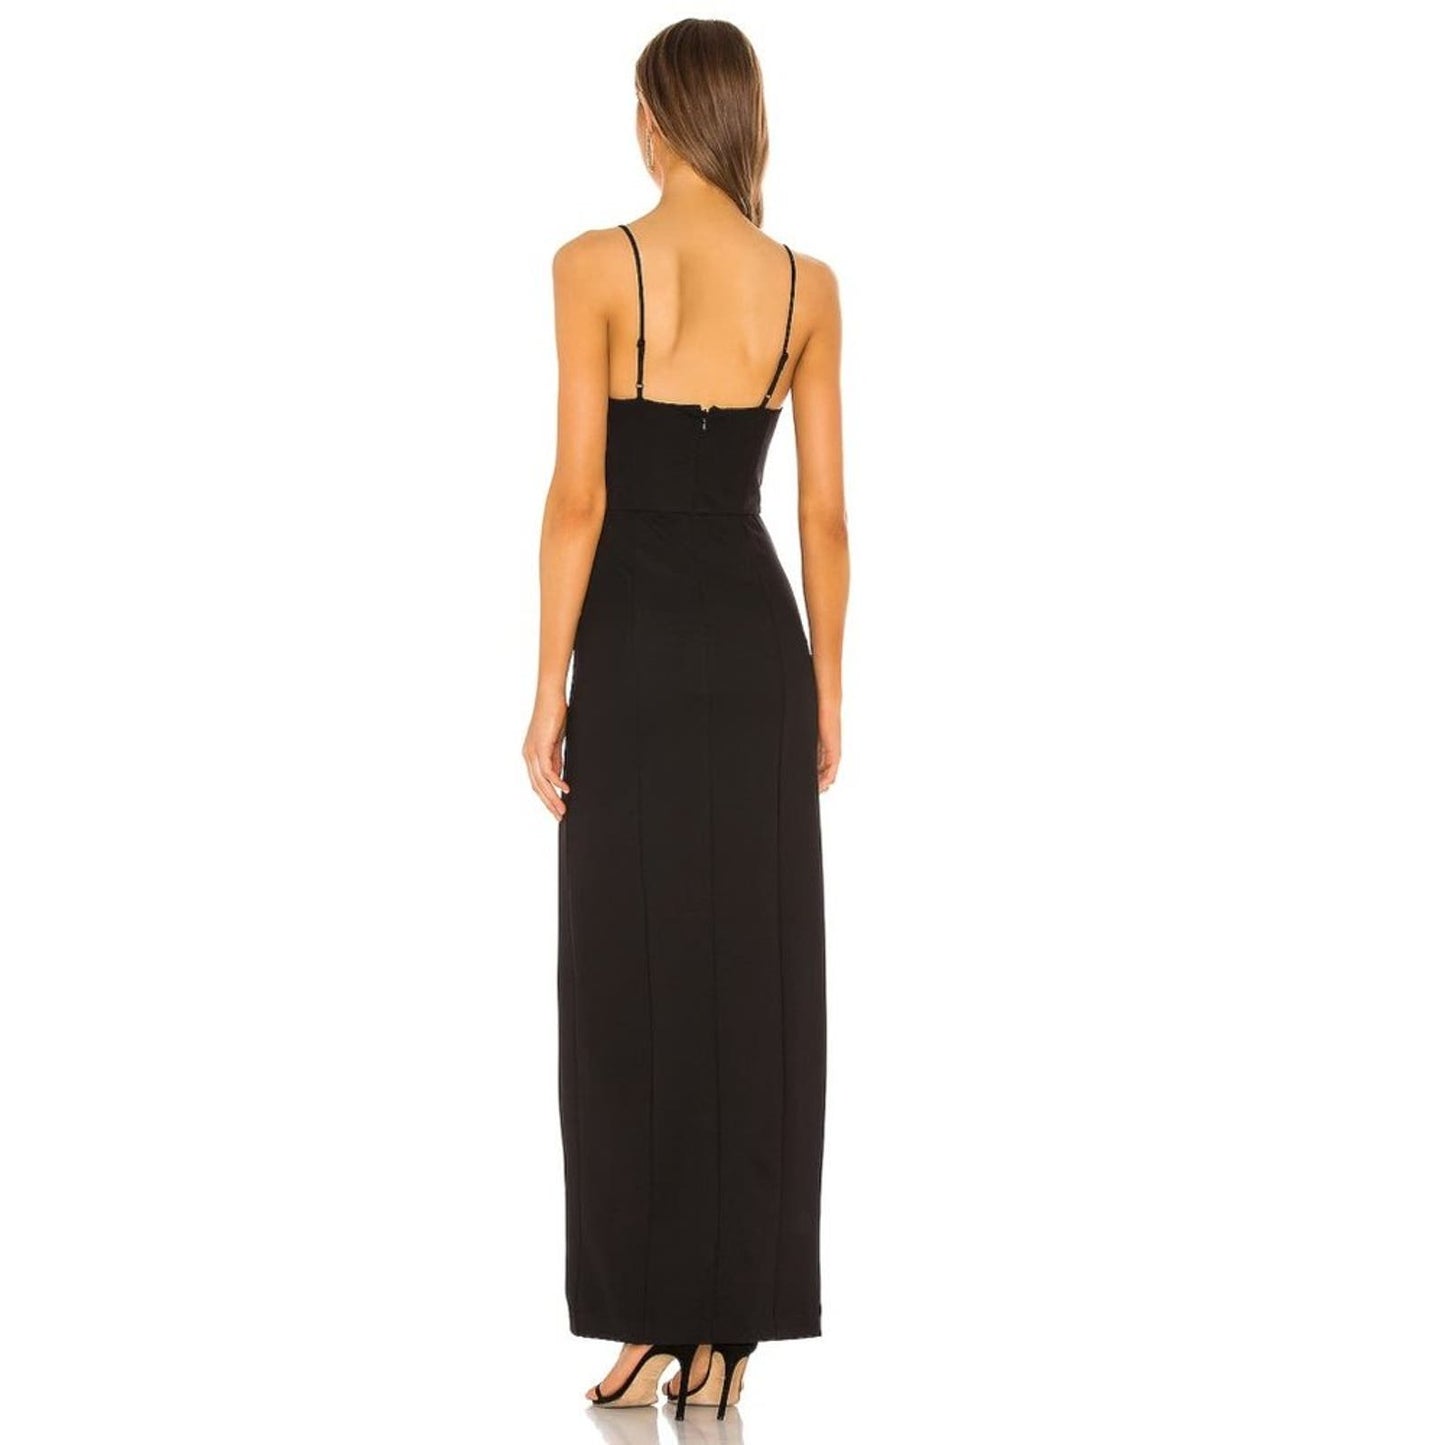 NBD Eileen Gown in Black NWT SIze Small